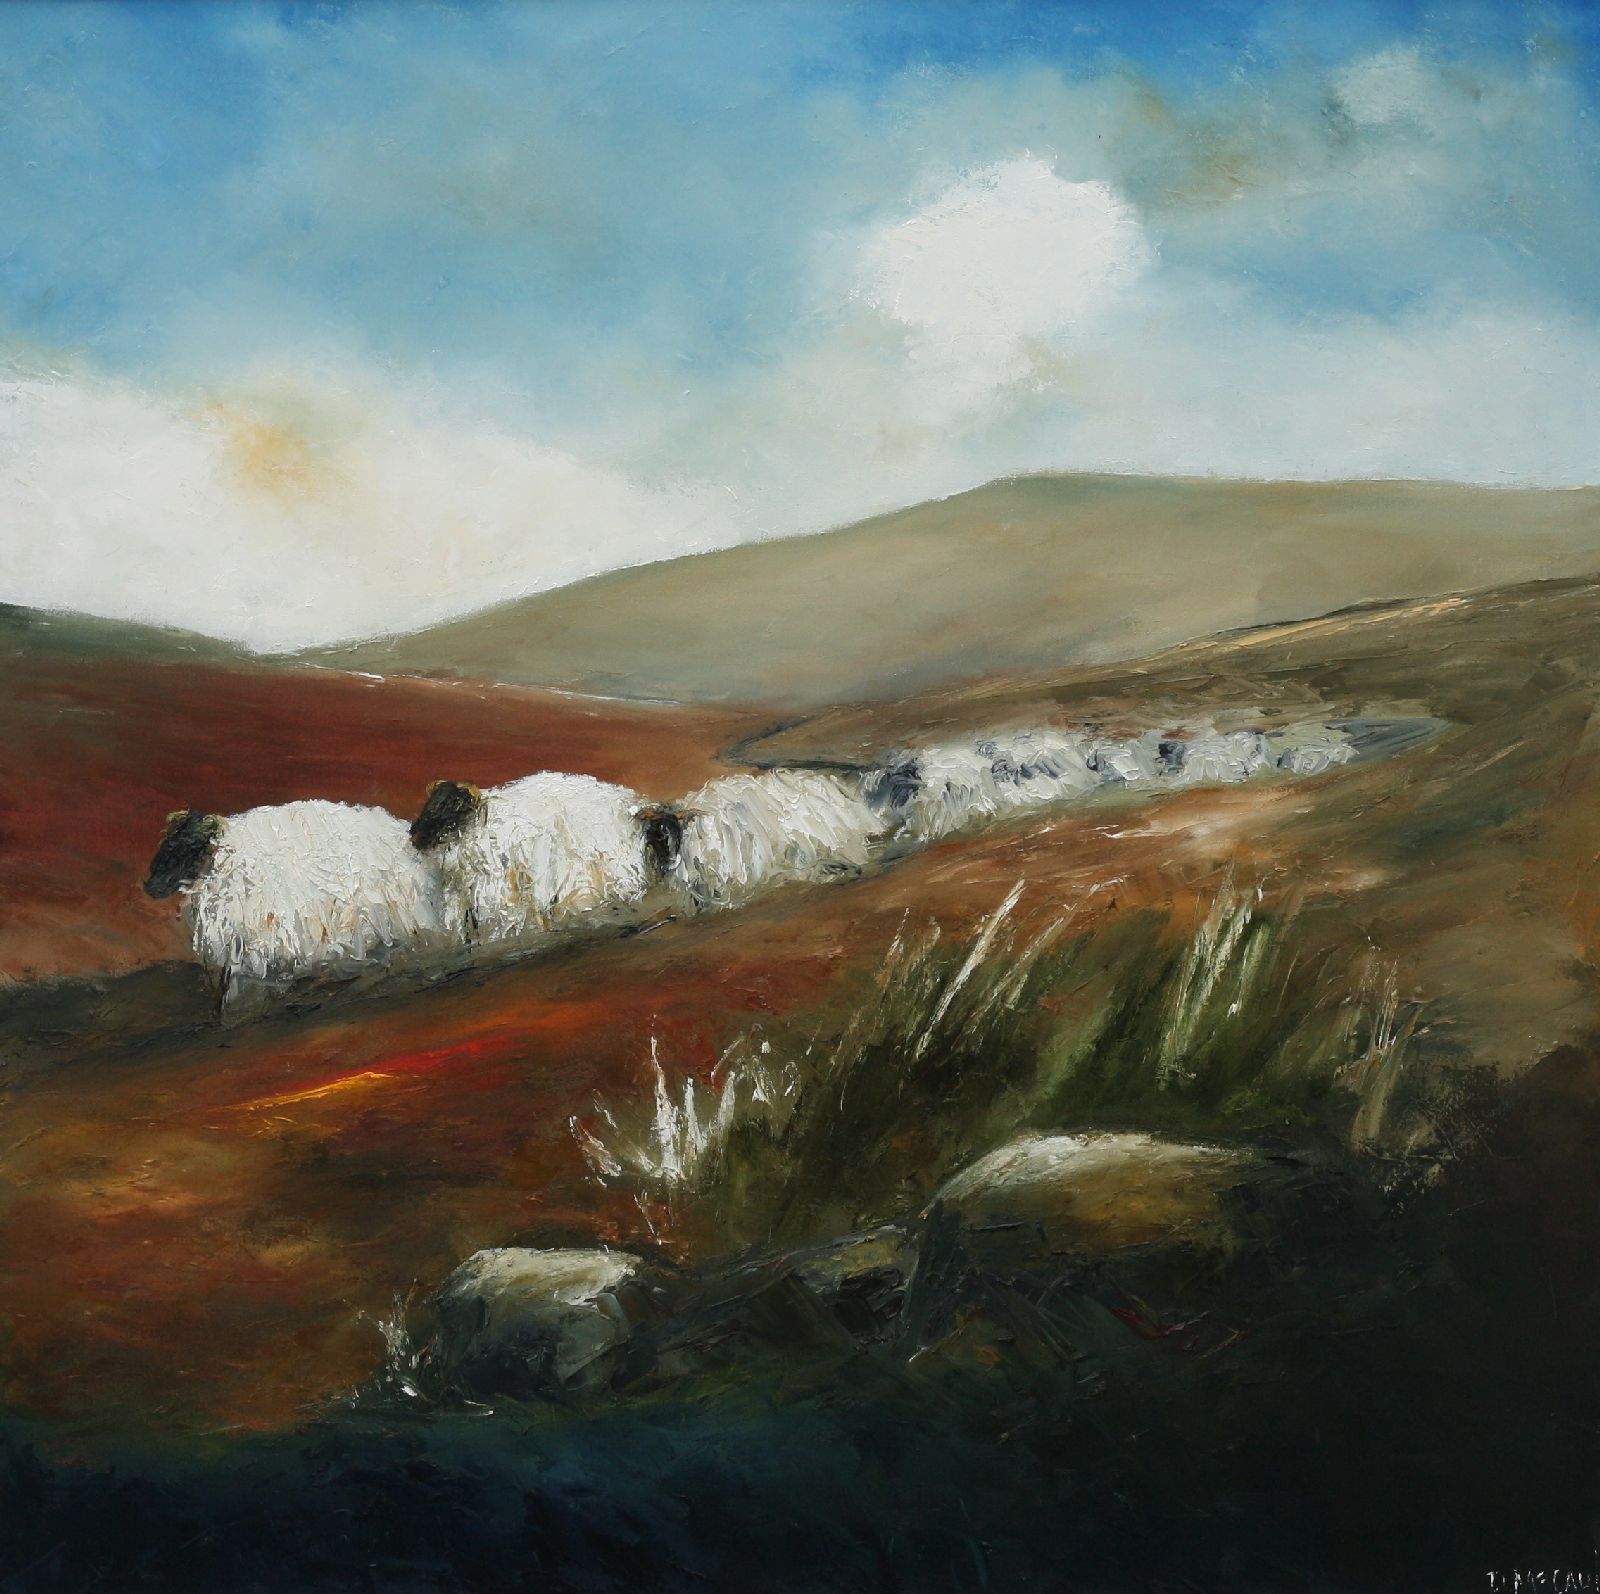 Are We There Yet by Padraig McCaul